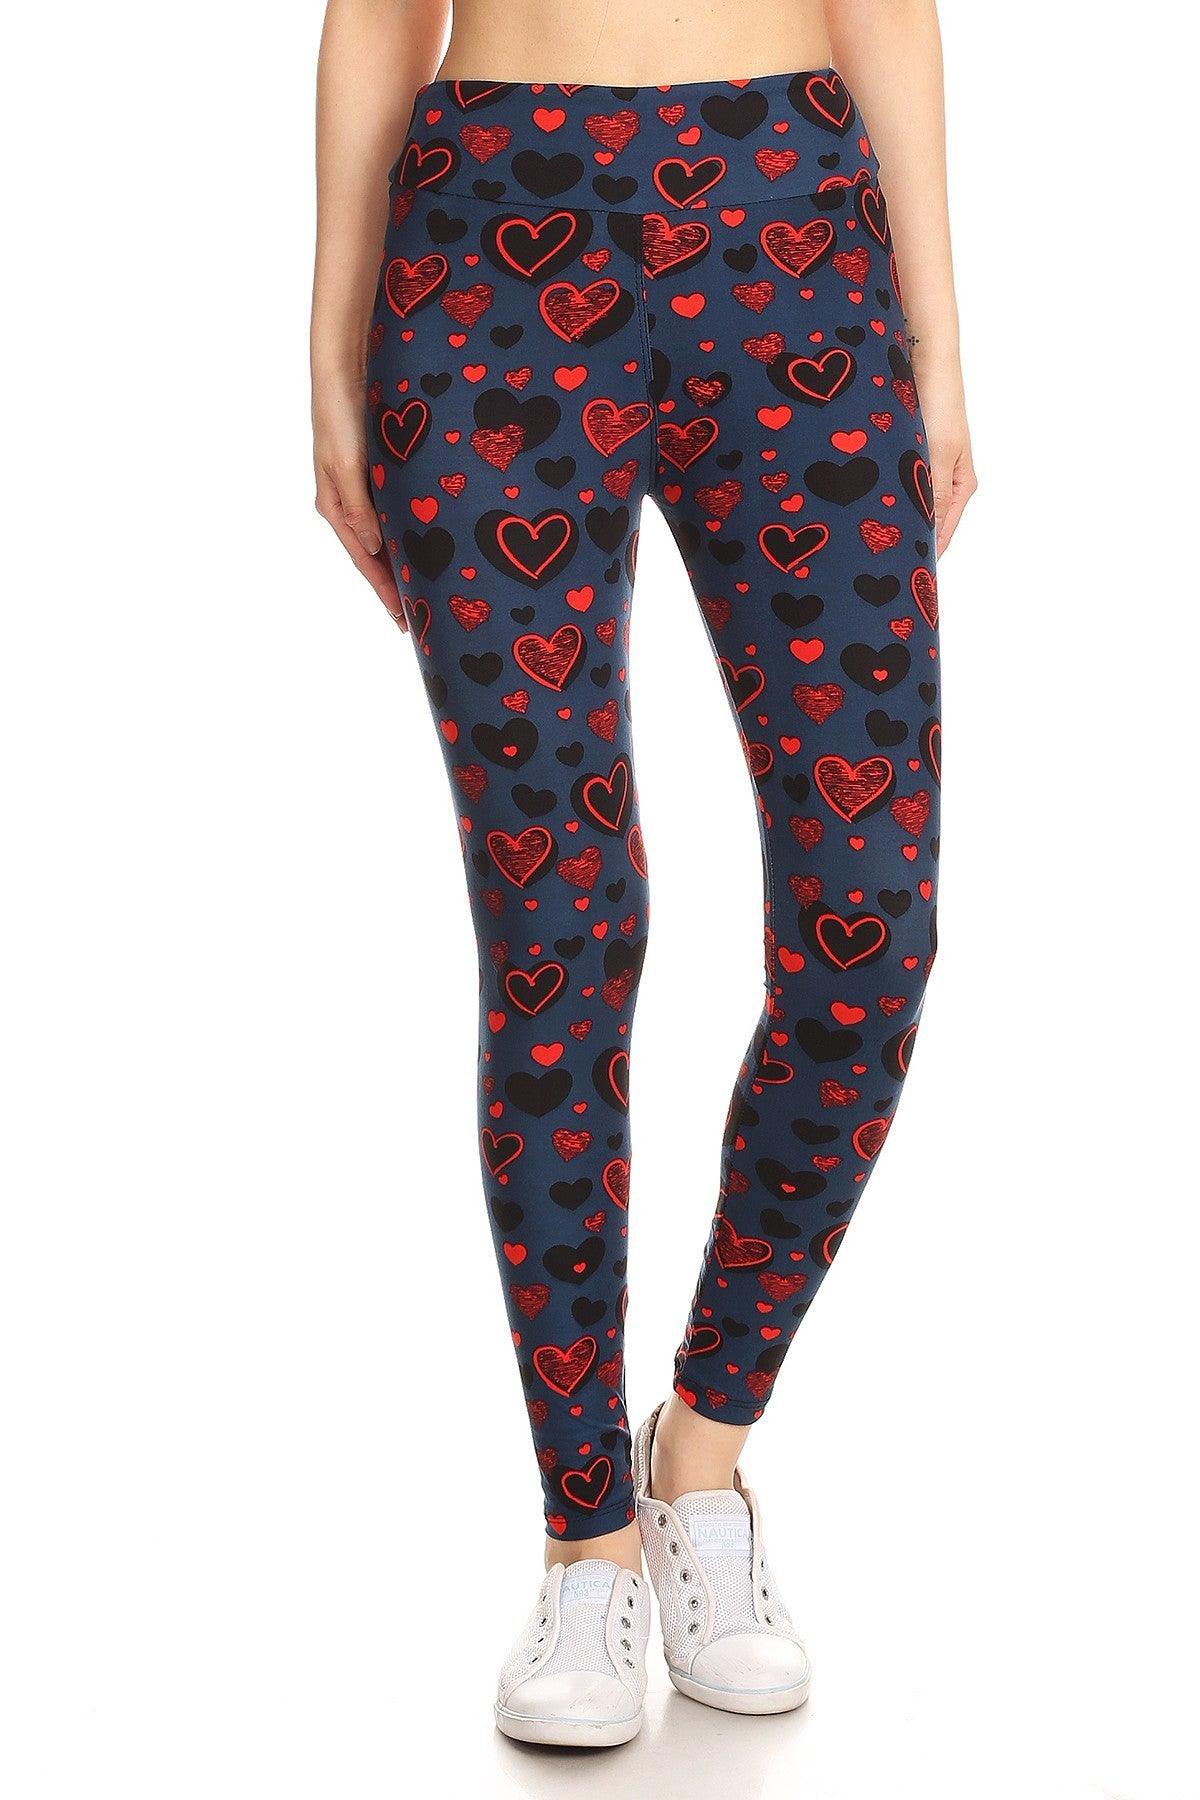 Yoga Style Banded Lined Heart Print, Full Length Leggings In A Slim Fitting Style With A Banded High Waist Naughty Smile Fashion